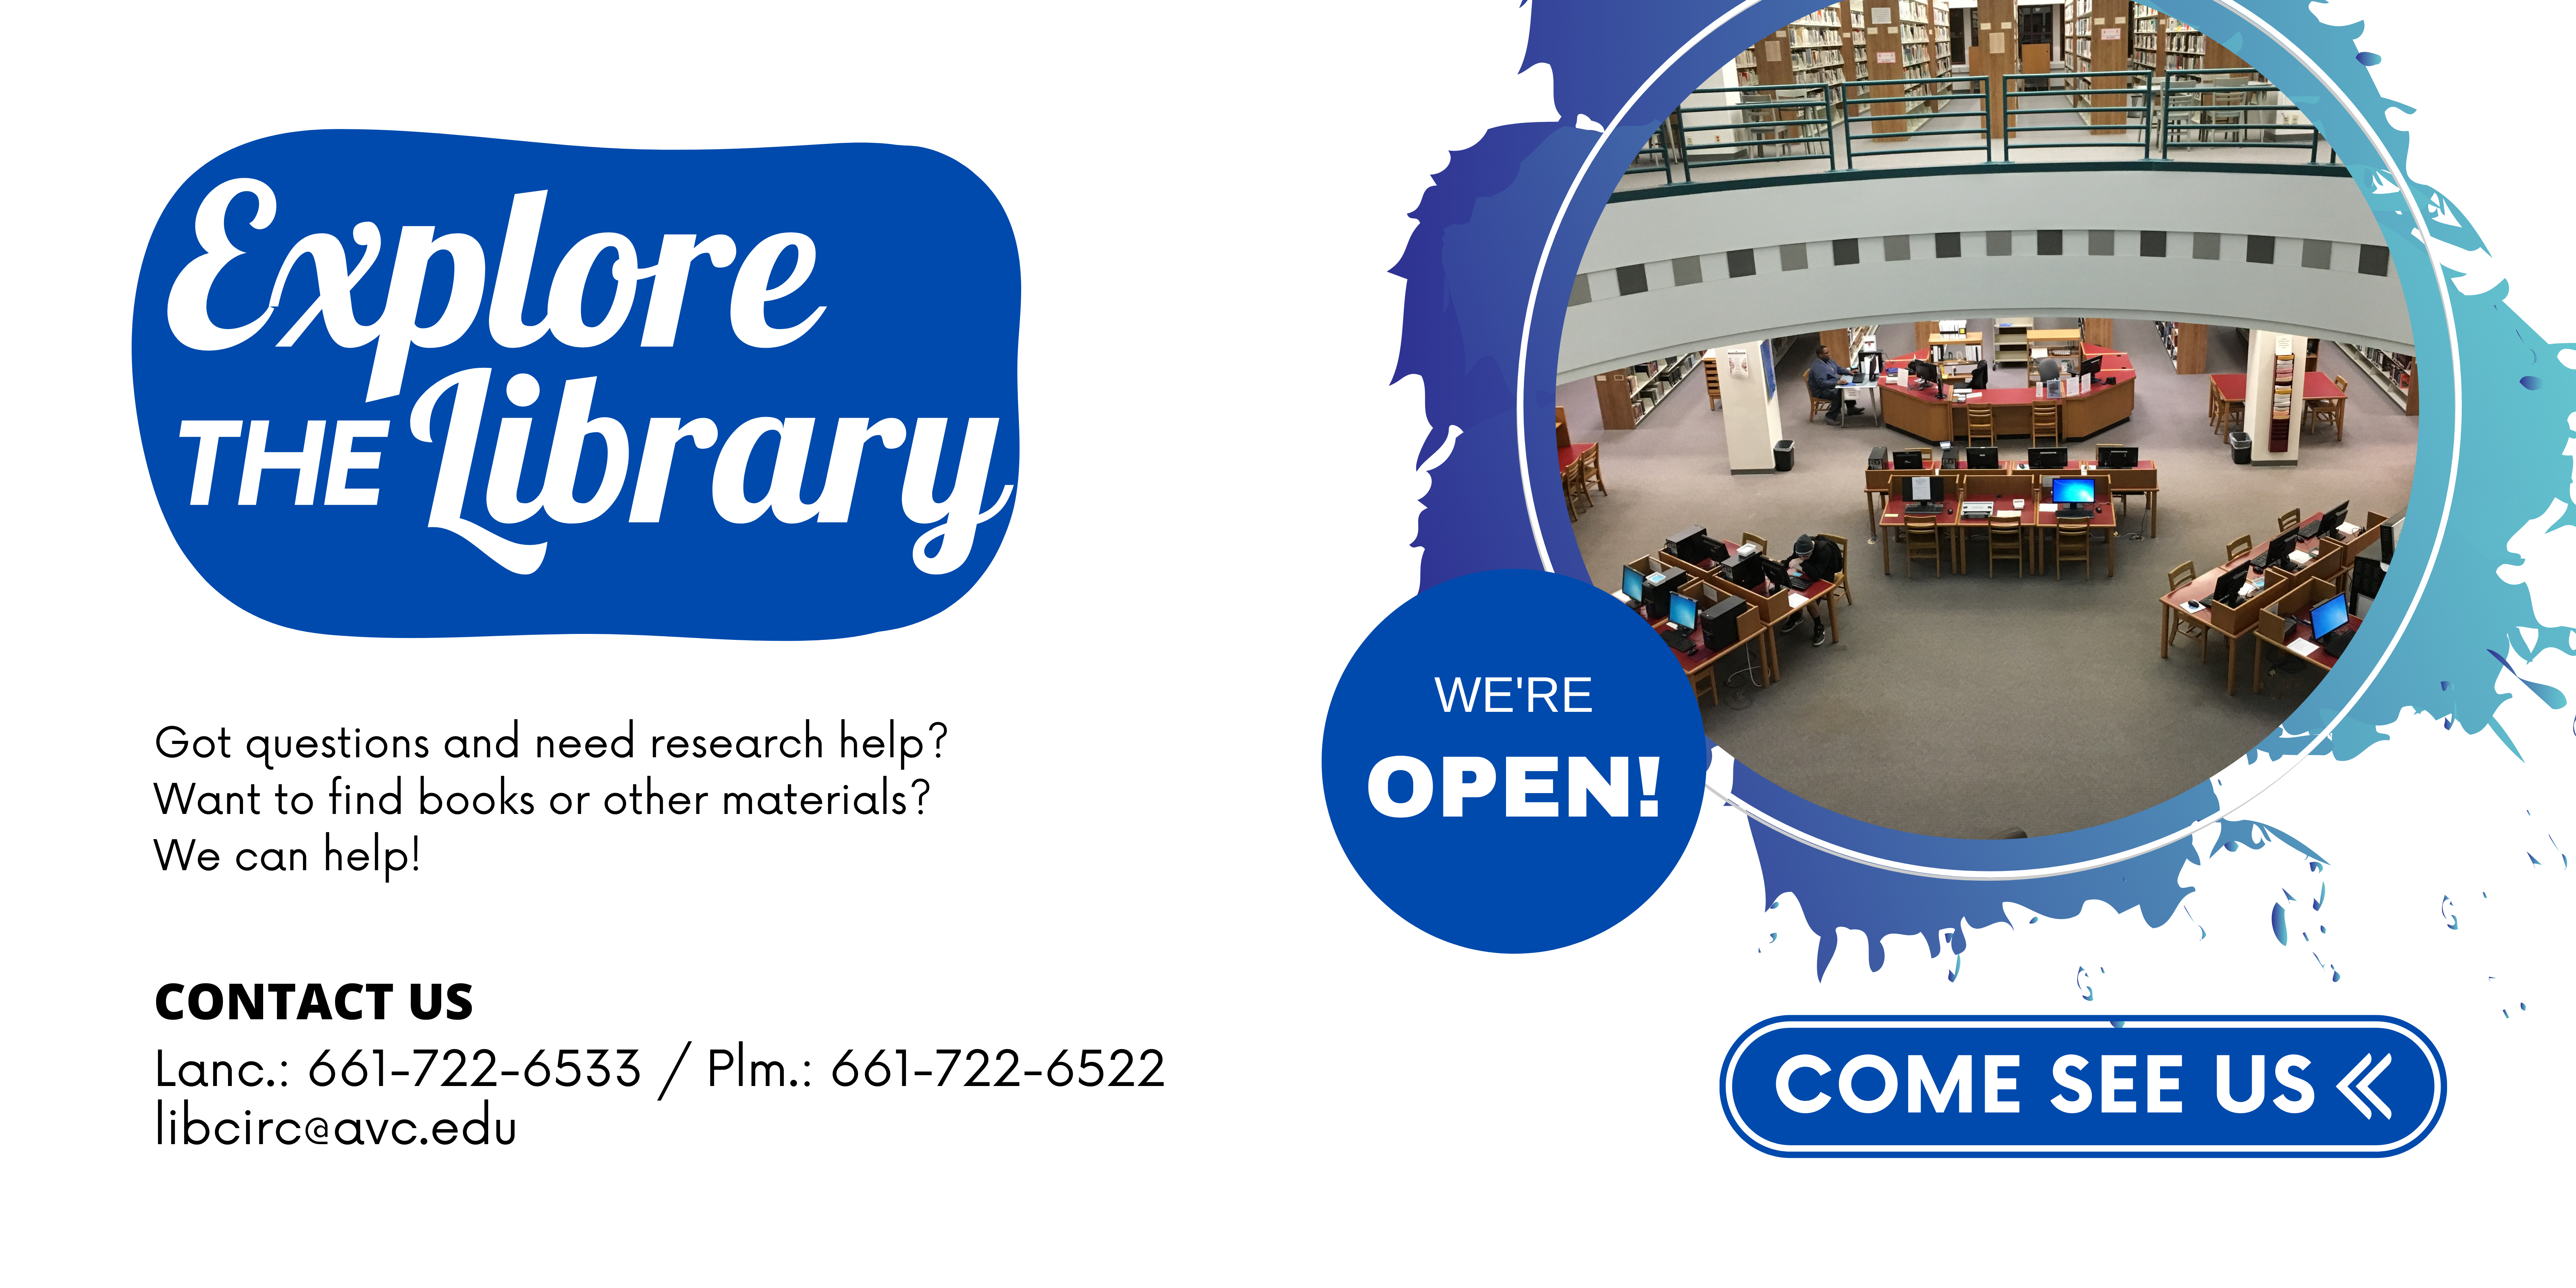 Explore the library - we're open so come see us! Contact us at 661-722-6533 in Lancaster or 661-722-6533 in Palmdale. You can email us at libcirc@avc.edu